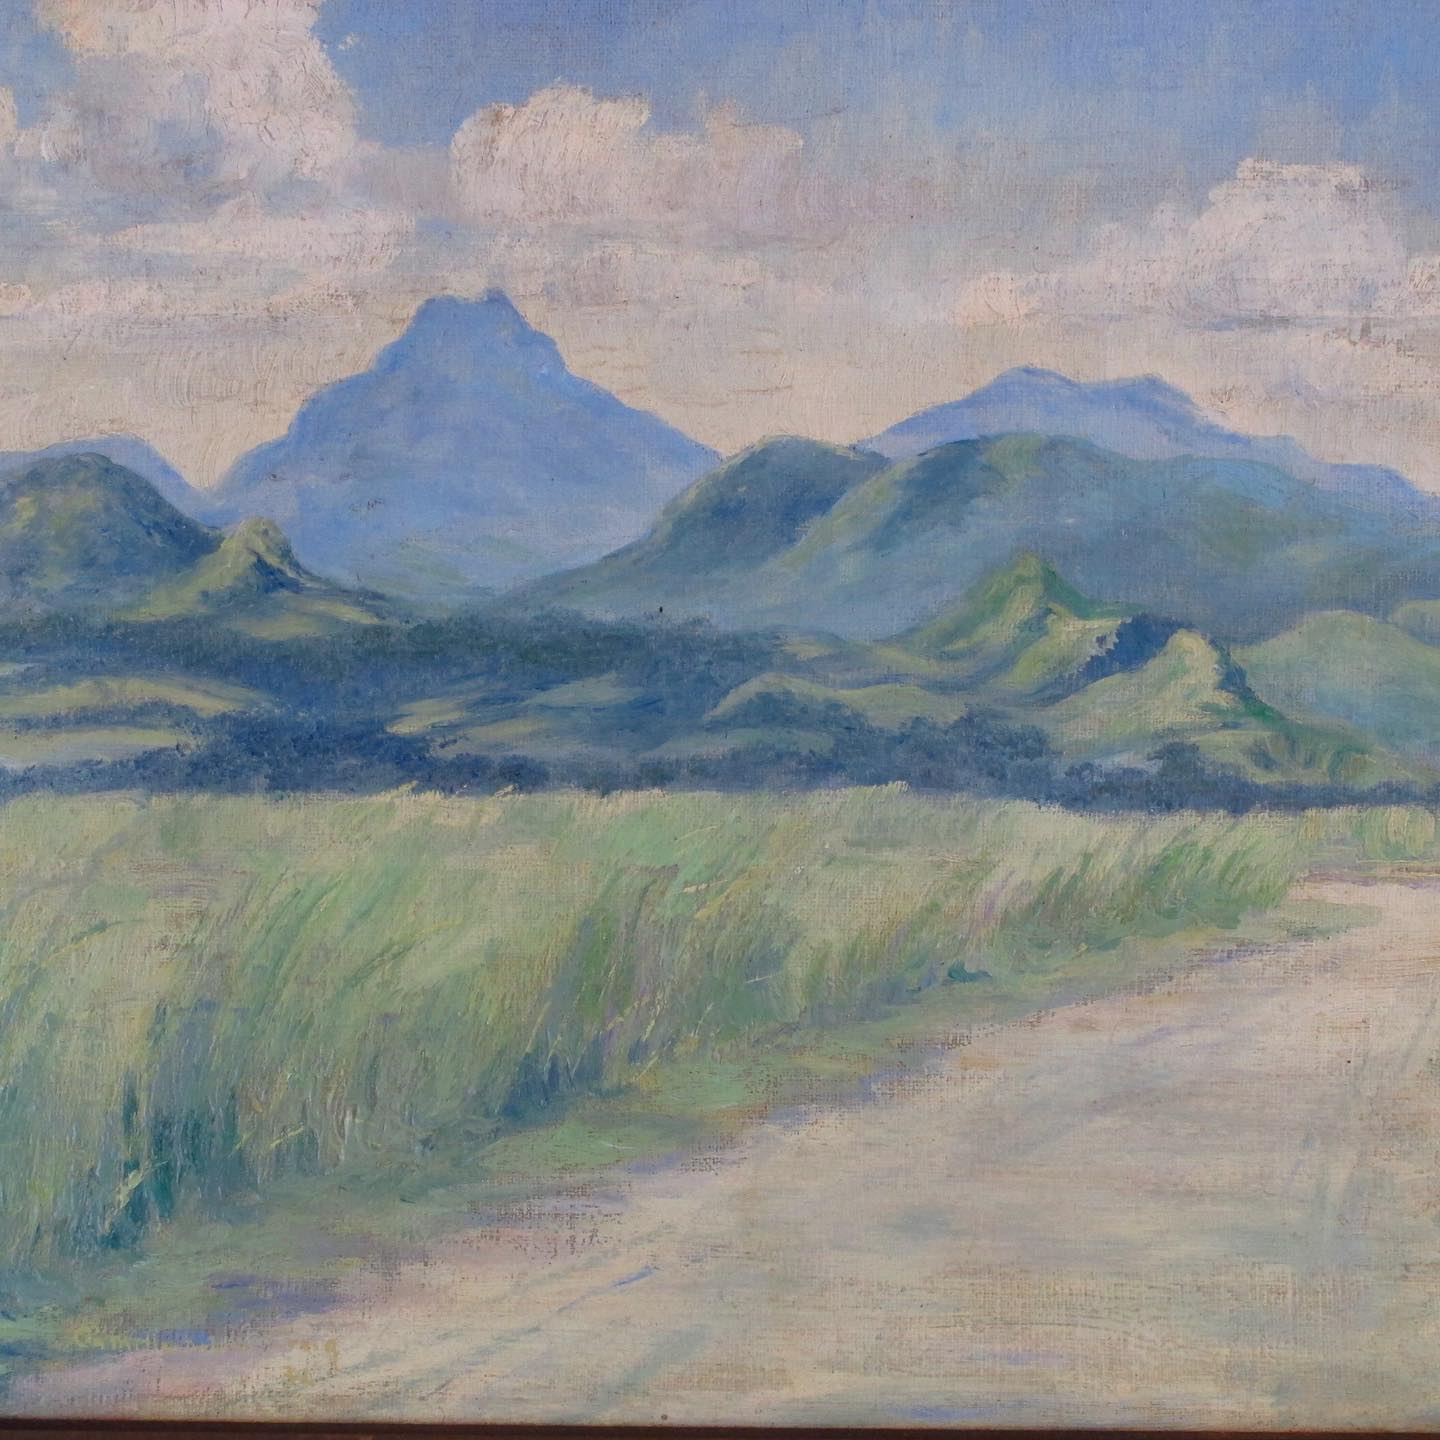 Camille Kufferath Signed Painting, Mountain and Meadow American Regionalist Landscape, c. 1920 in period frame